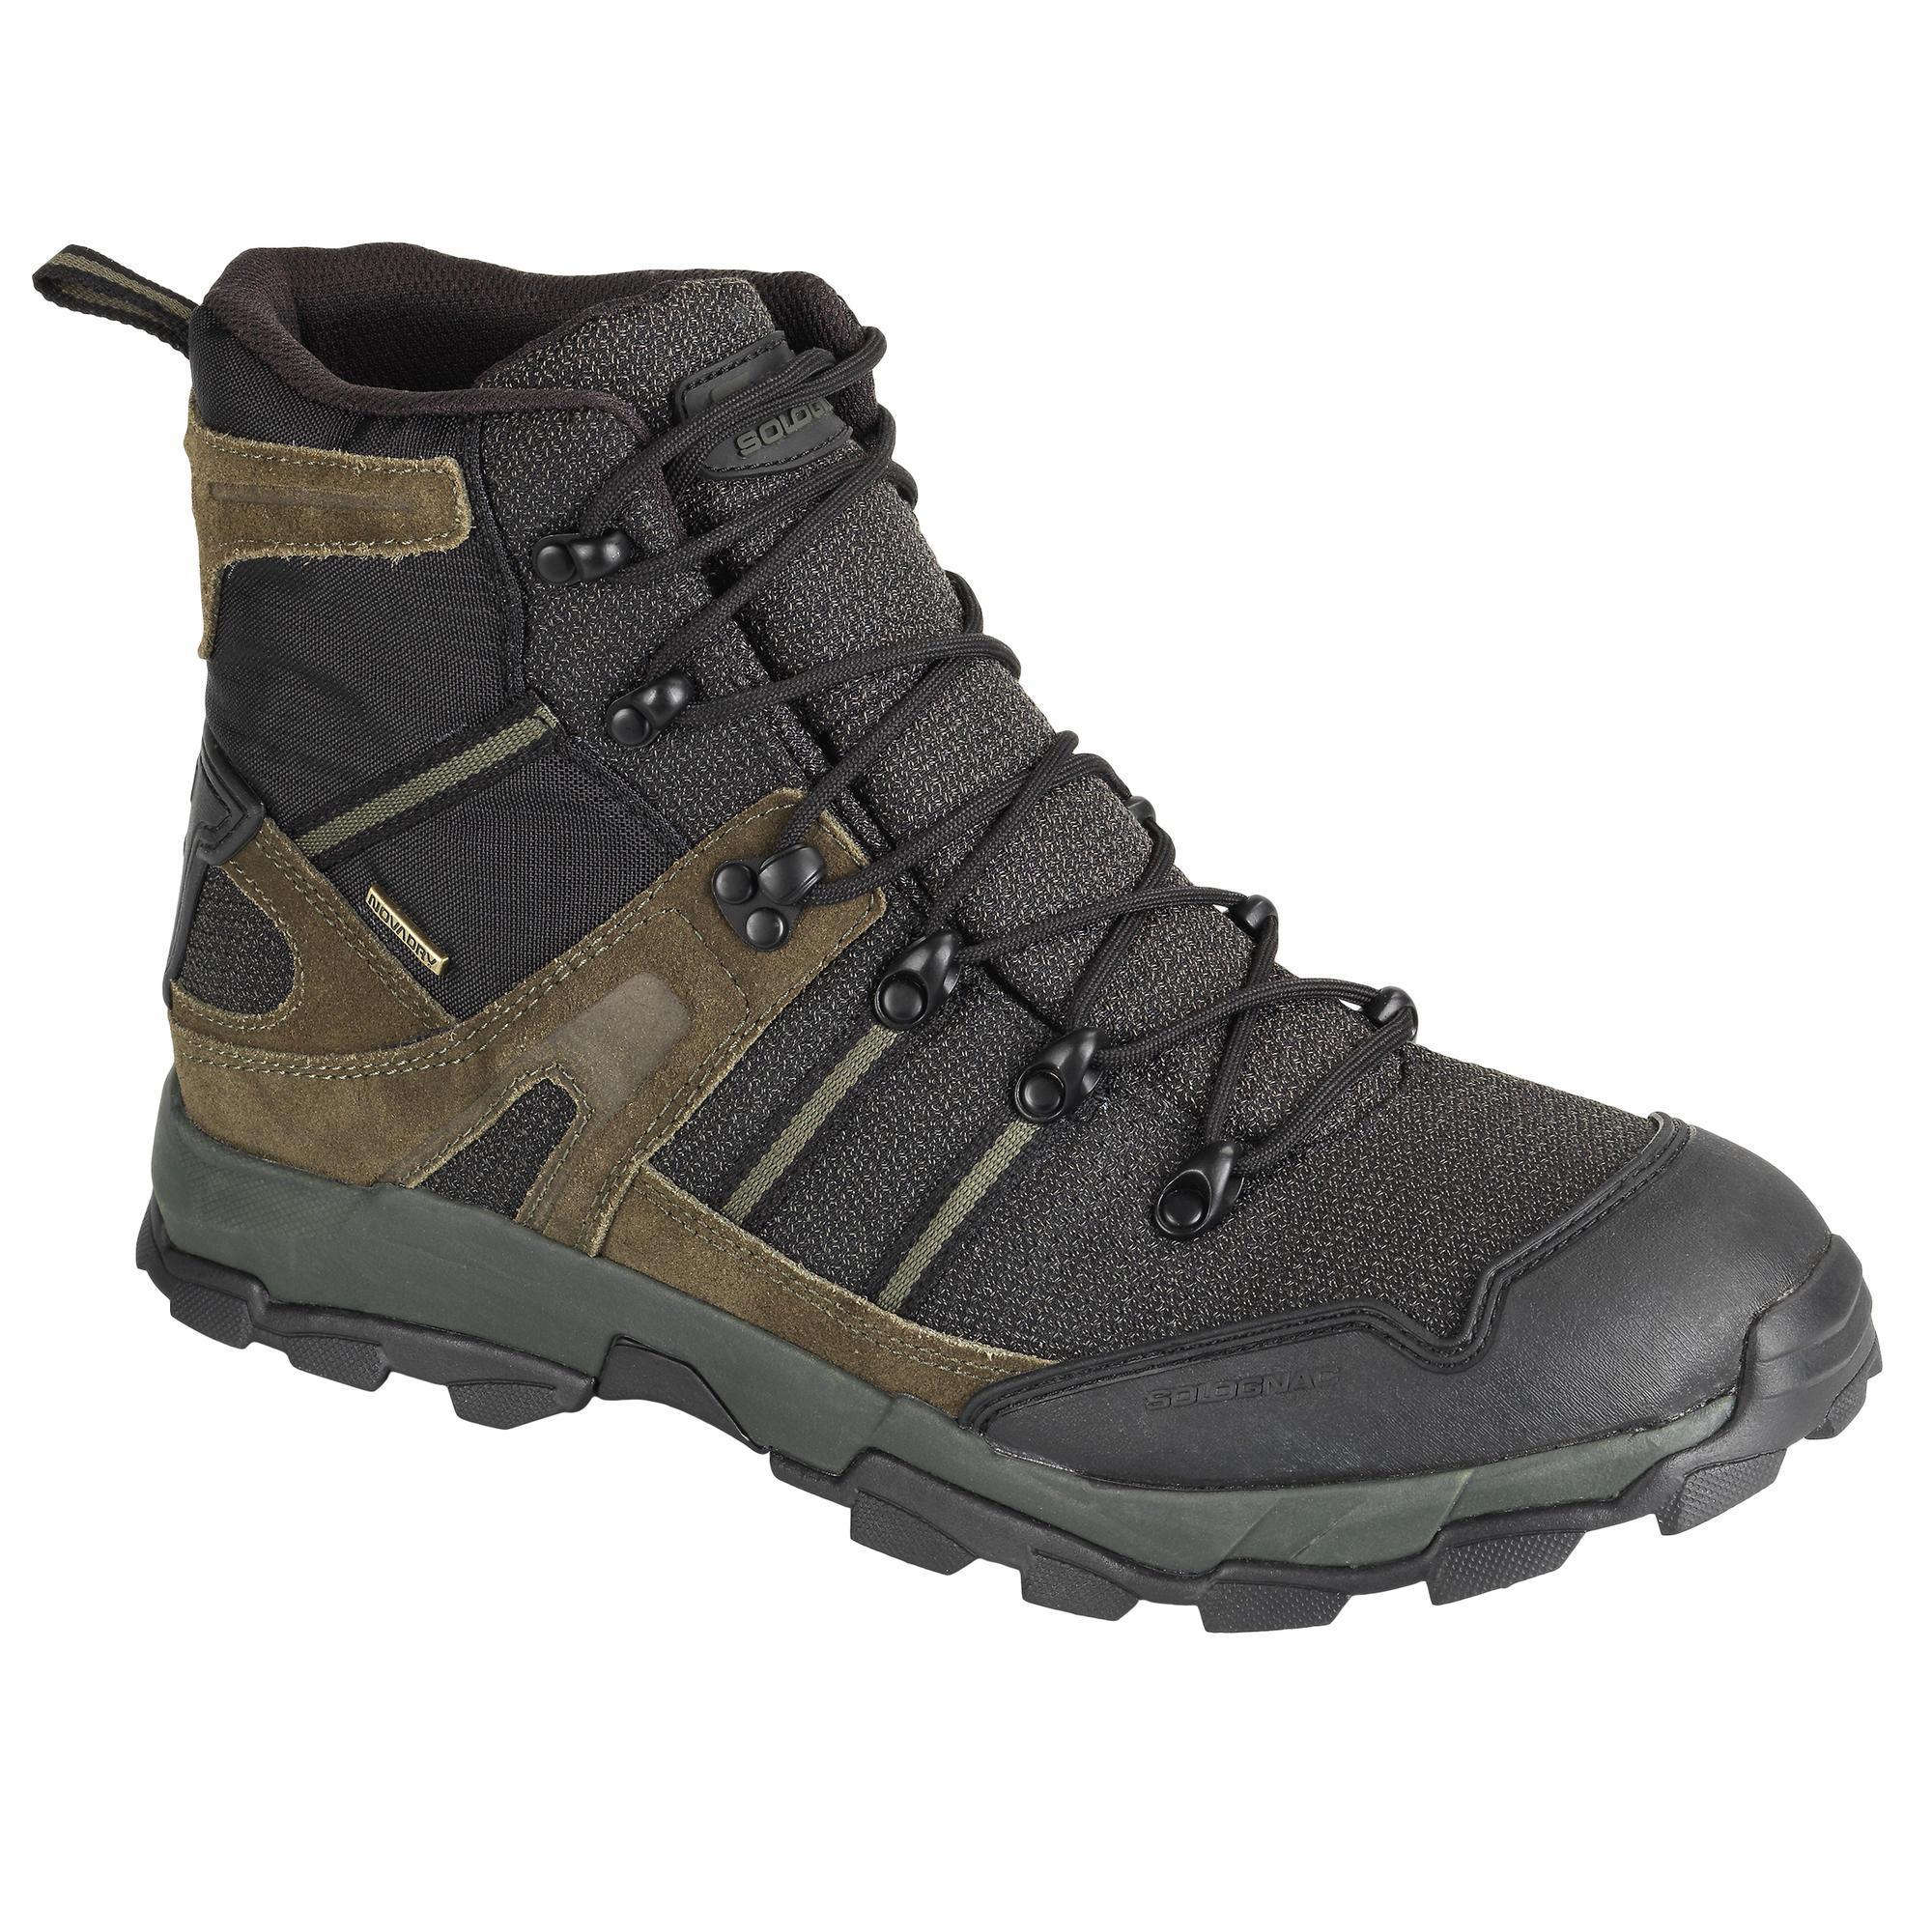 Hunting Boots And Shoes - Decathlon